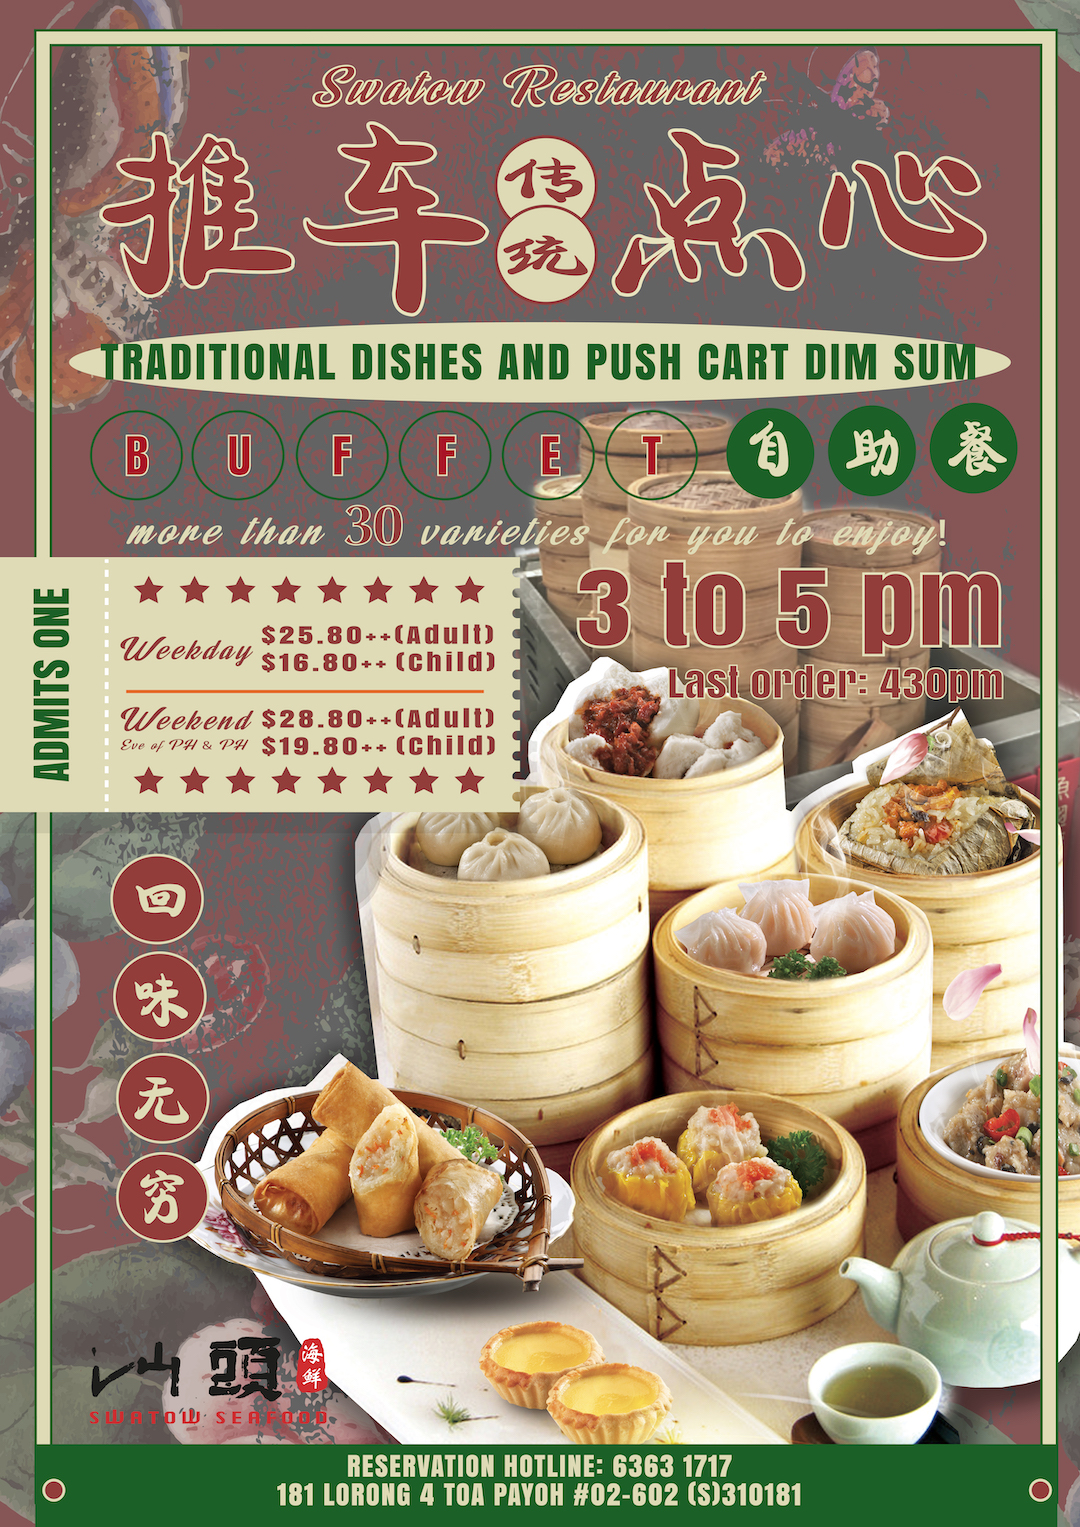 Swatow Seafood Dim Sum High Tea Buffet Is Available Daily From $25.80++ - 1